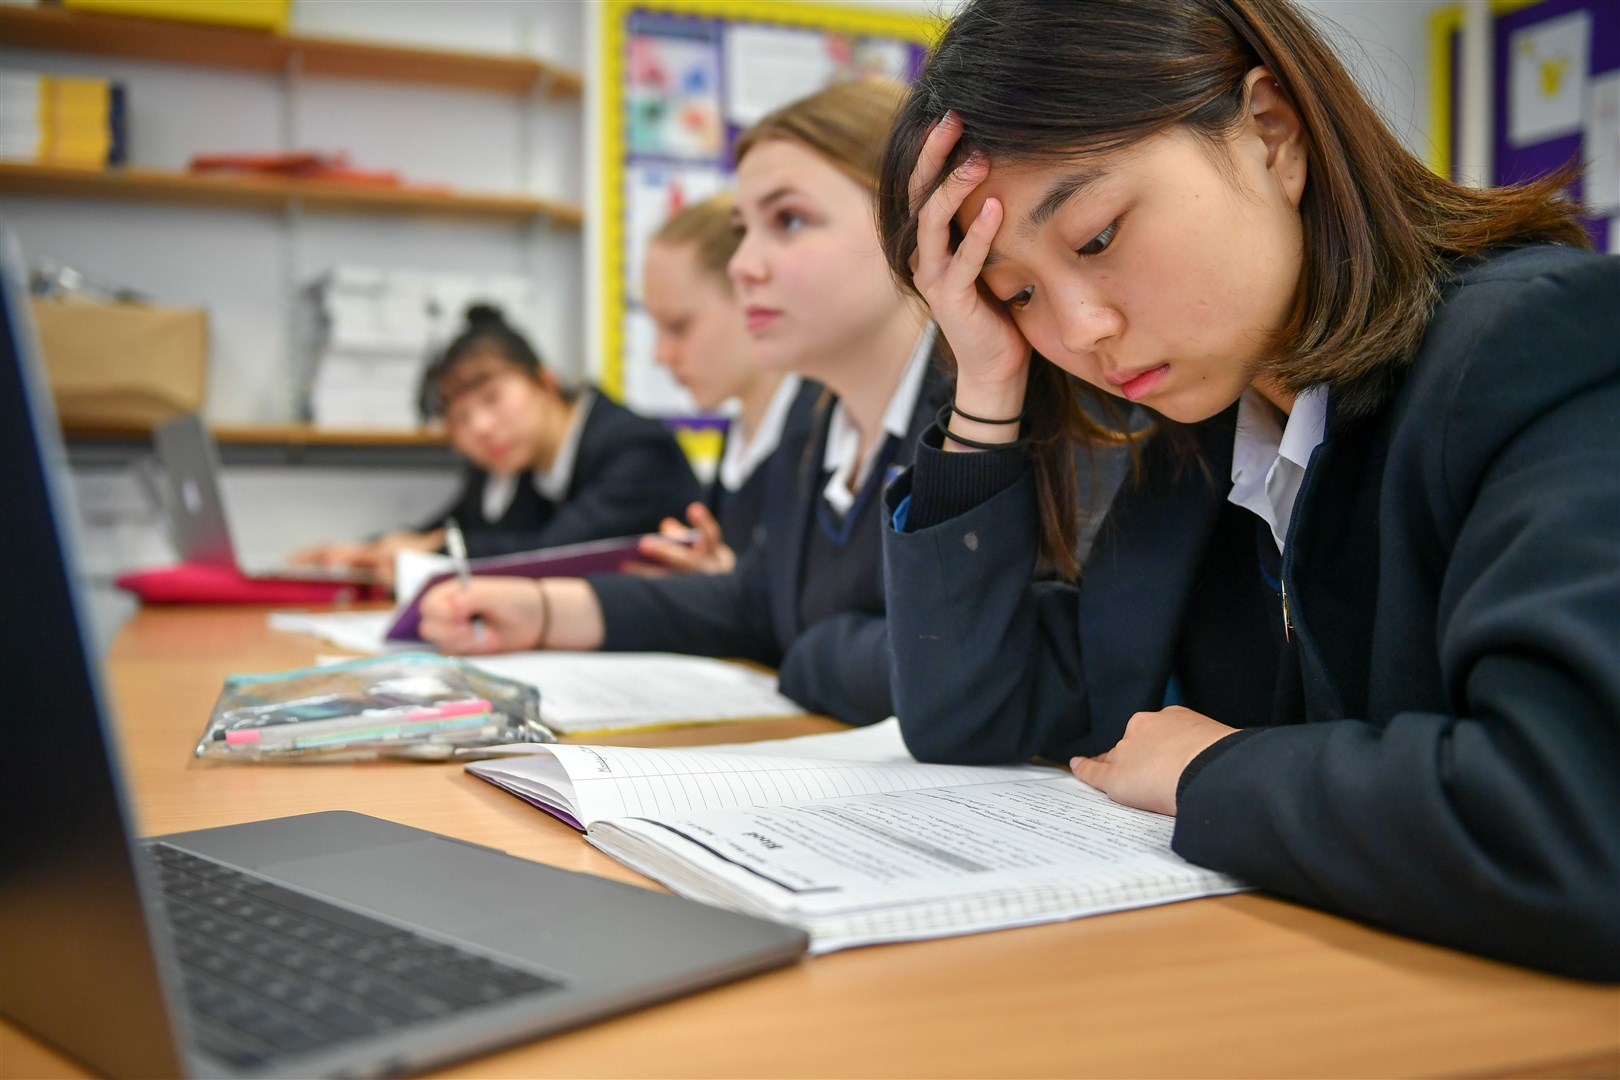 Among its findings the report showed pupils in years 10 and 11 were most disadvantaged by online learning, and that girls suffered greater anxiety than boys about returning to school (Ben Birchall/PA)